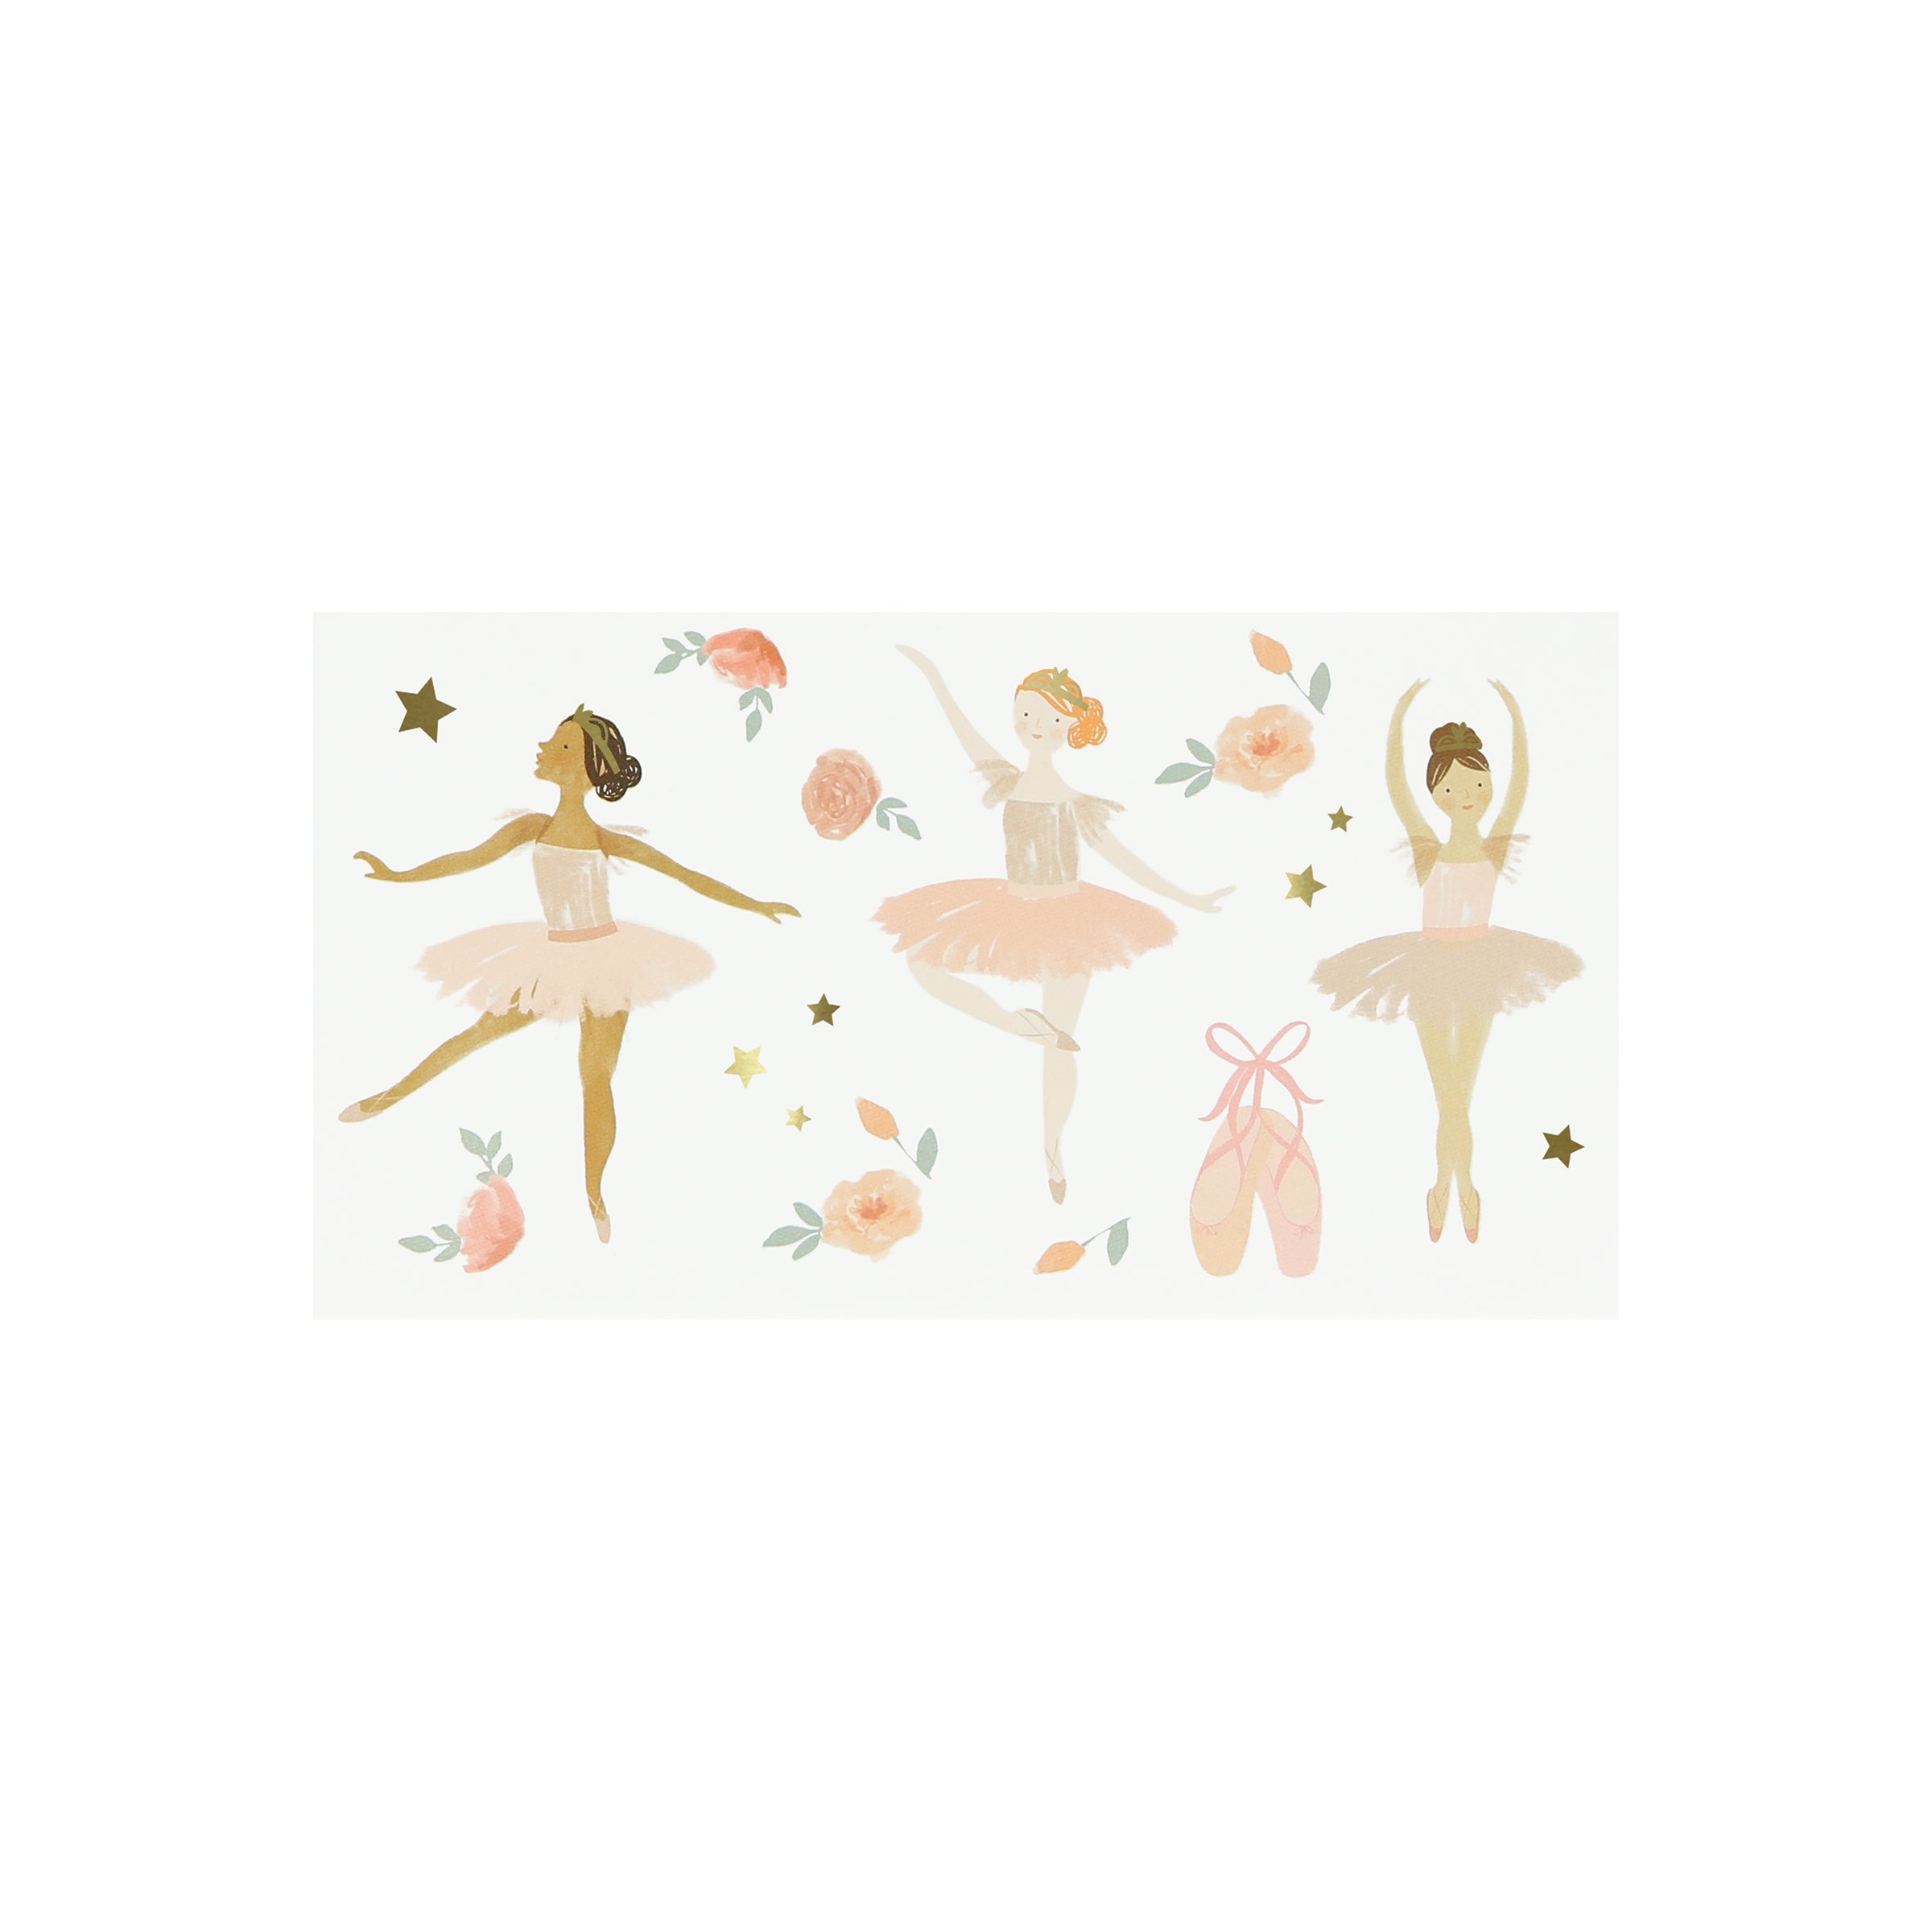 Our temporary tattoos feature ballet dancers for a fabulous decoration.